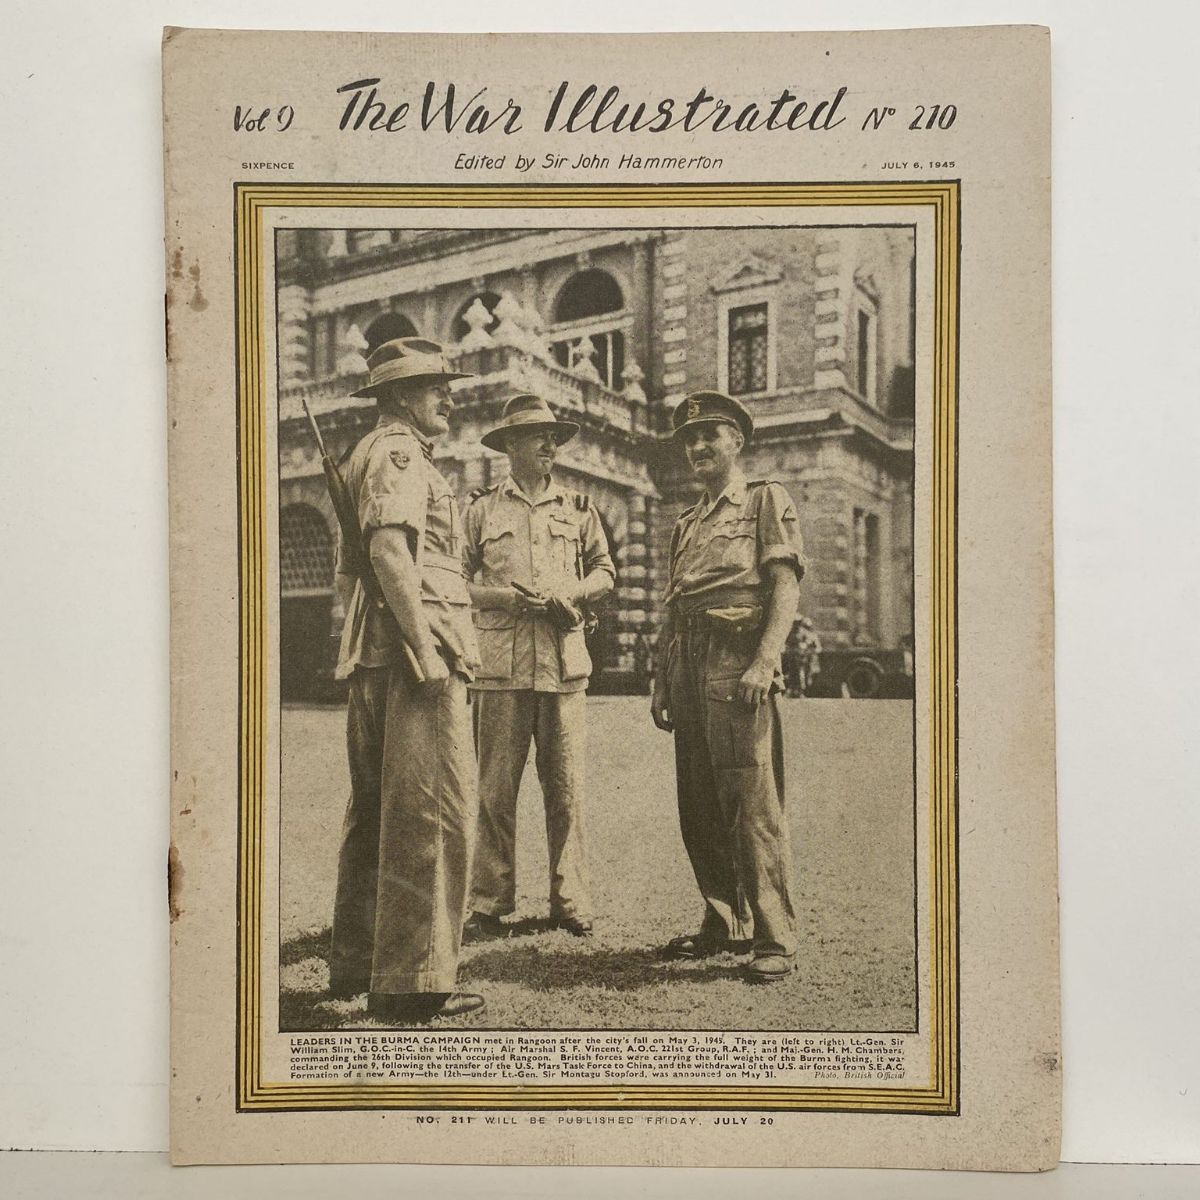 THE WAR ILLUSTRATED - Vol 9, No 210, 6th July 1945